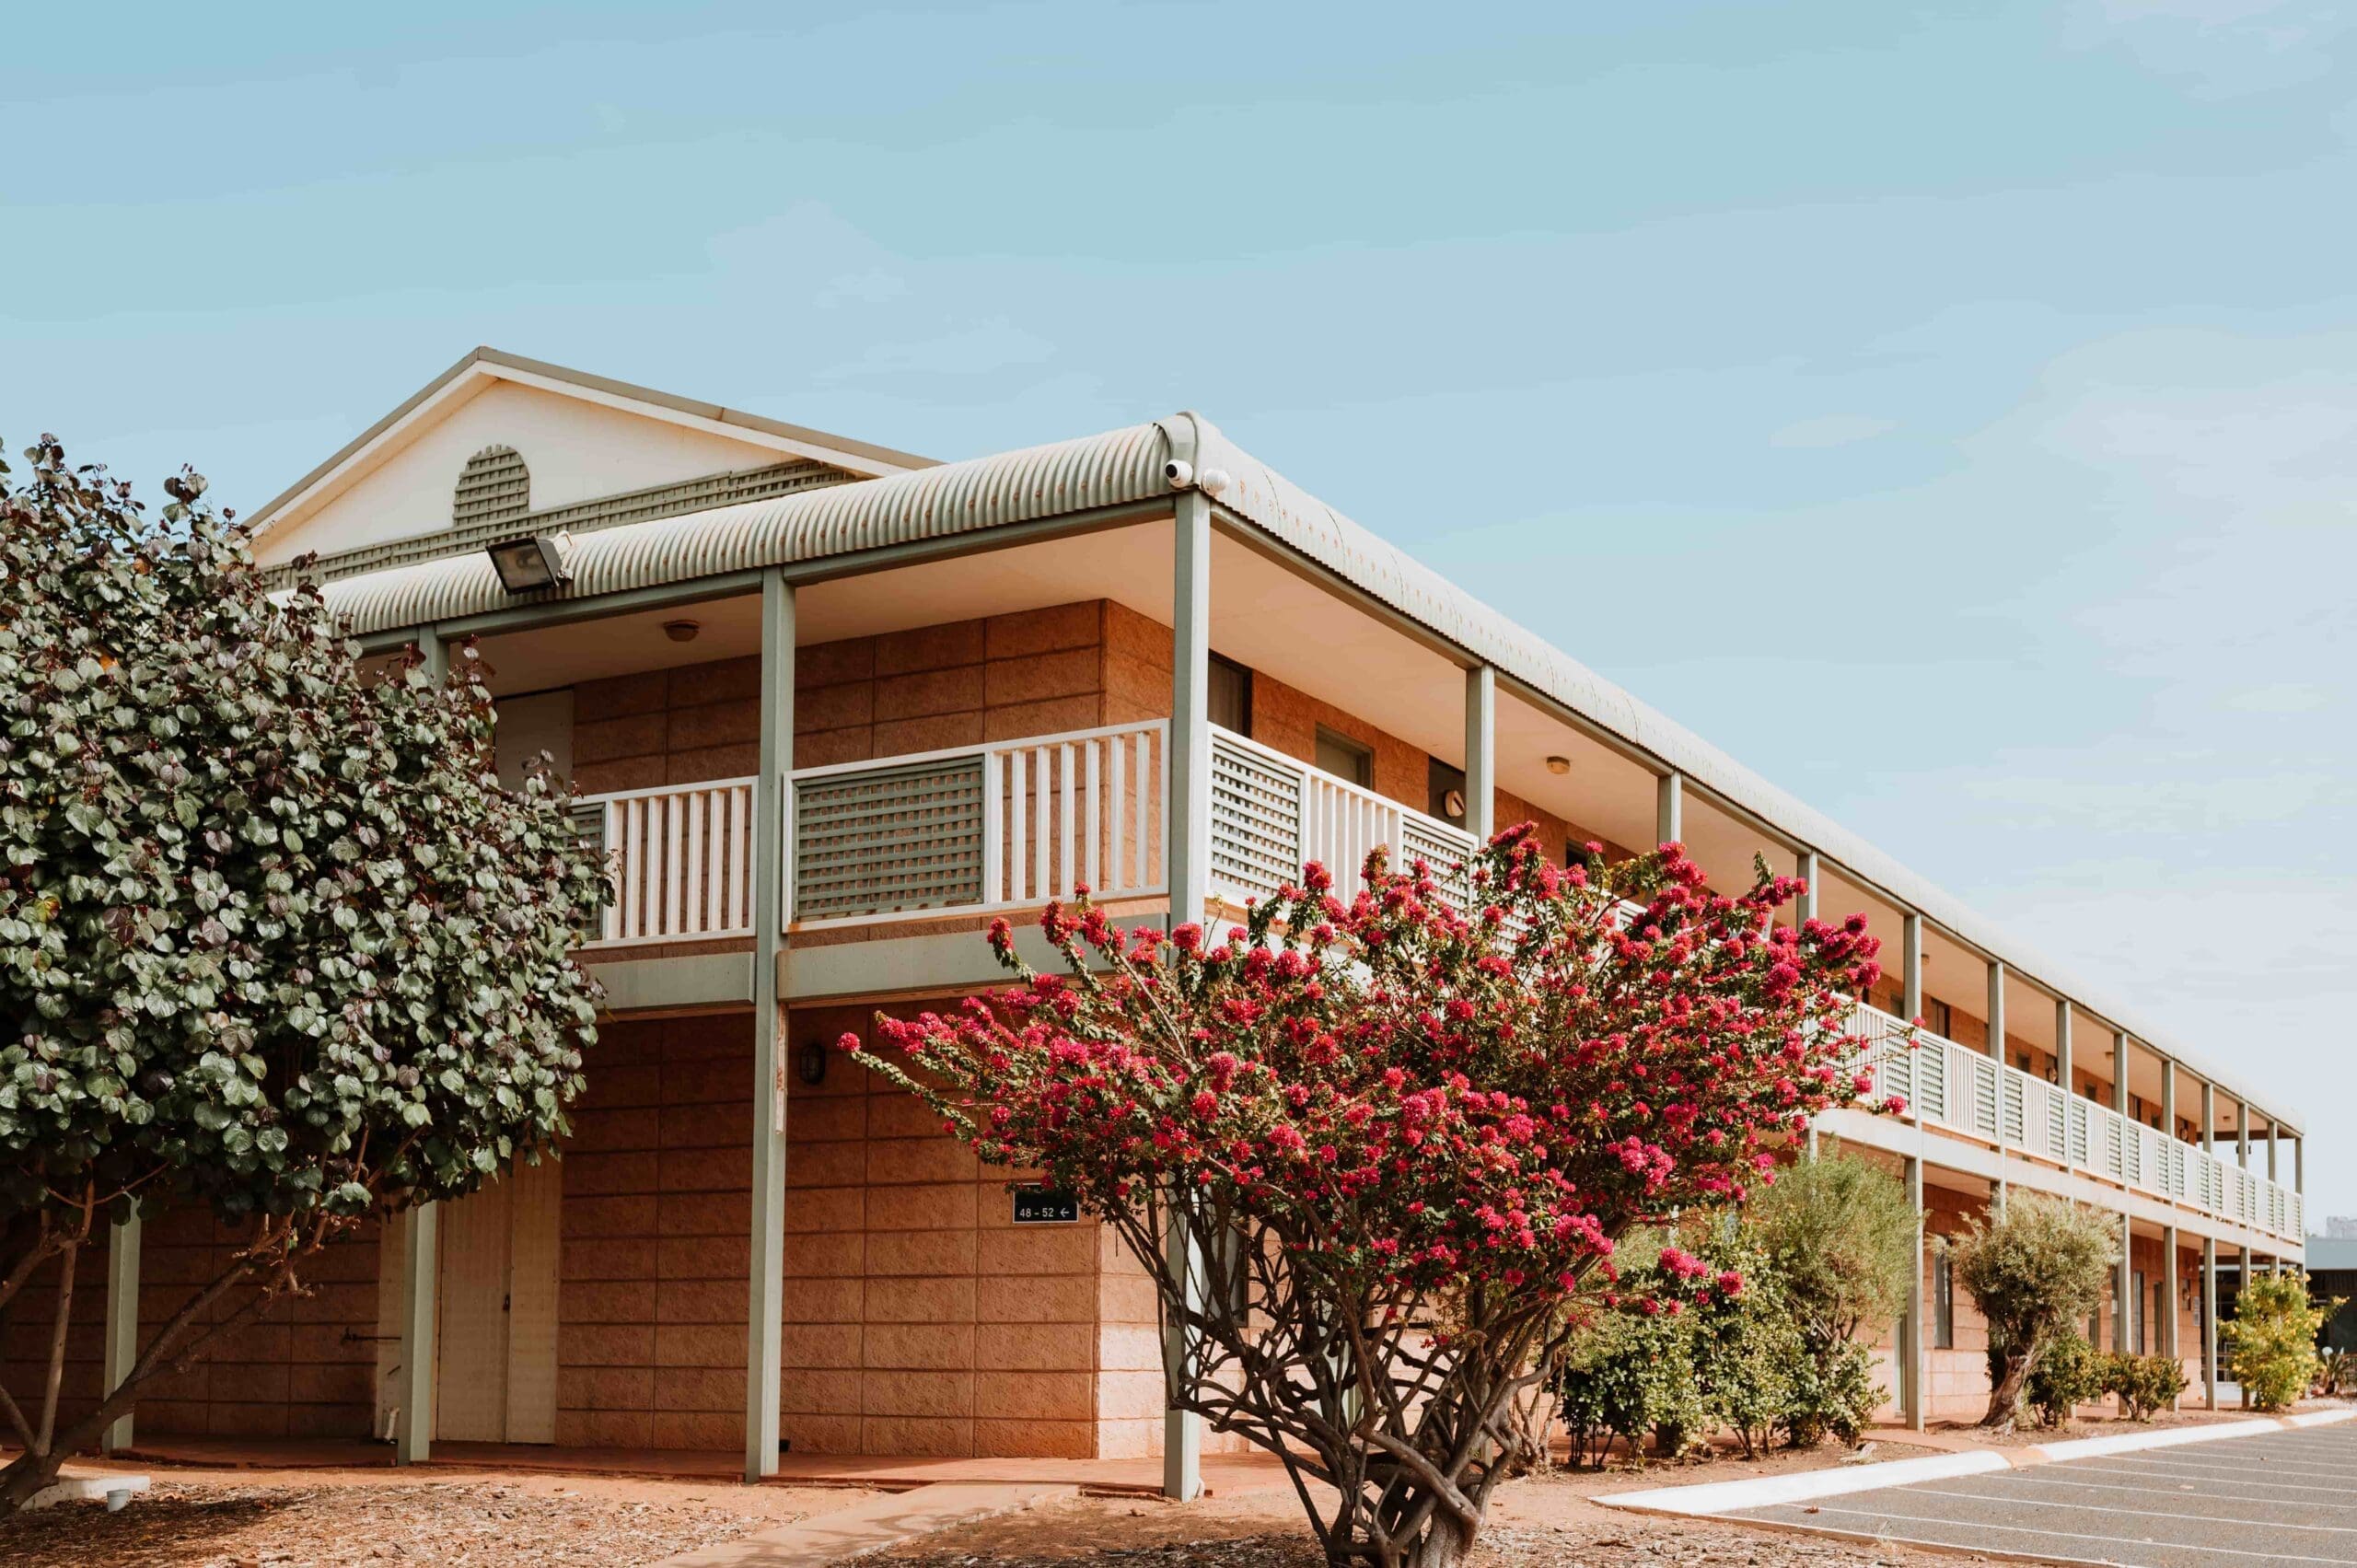 exterior view of rooms at The Hedland Hotel with wrap around terrace and native plants. The sun is shining and the day is bright